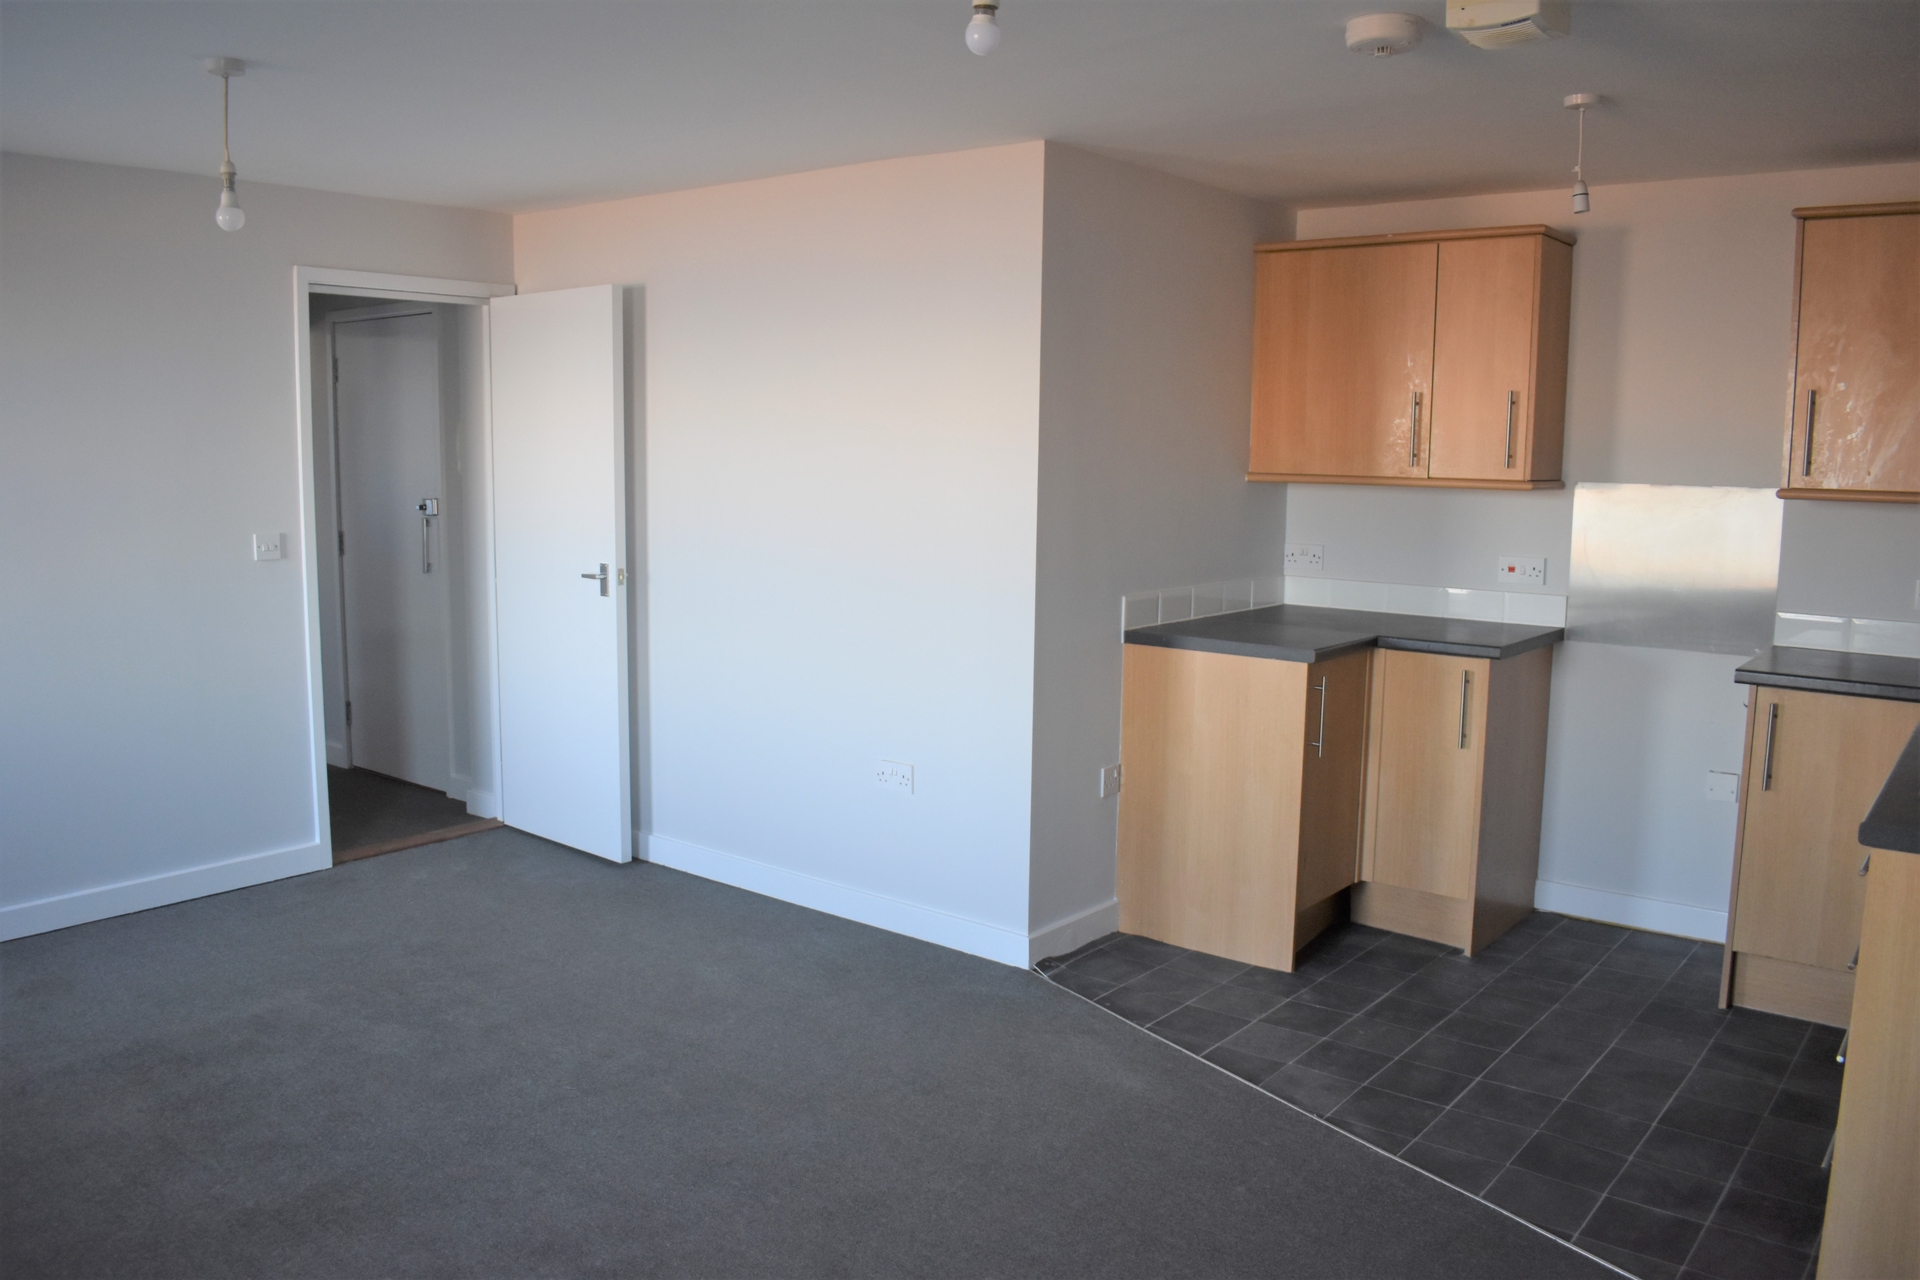 Flat to rent in Marine Terrace, Margate - Property Image 1